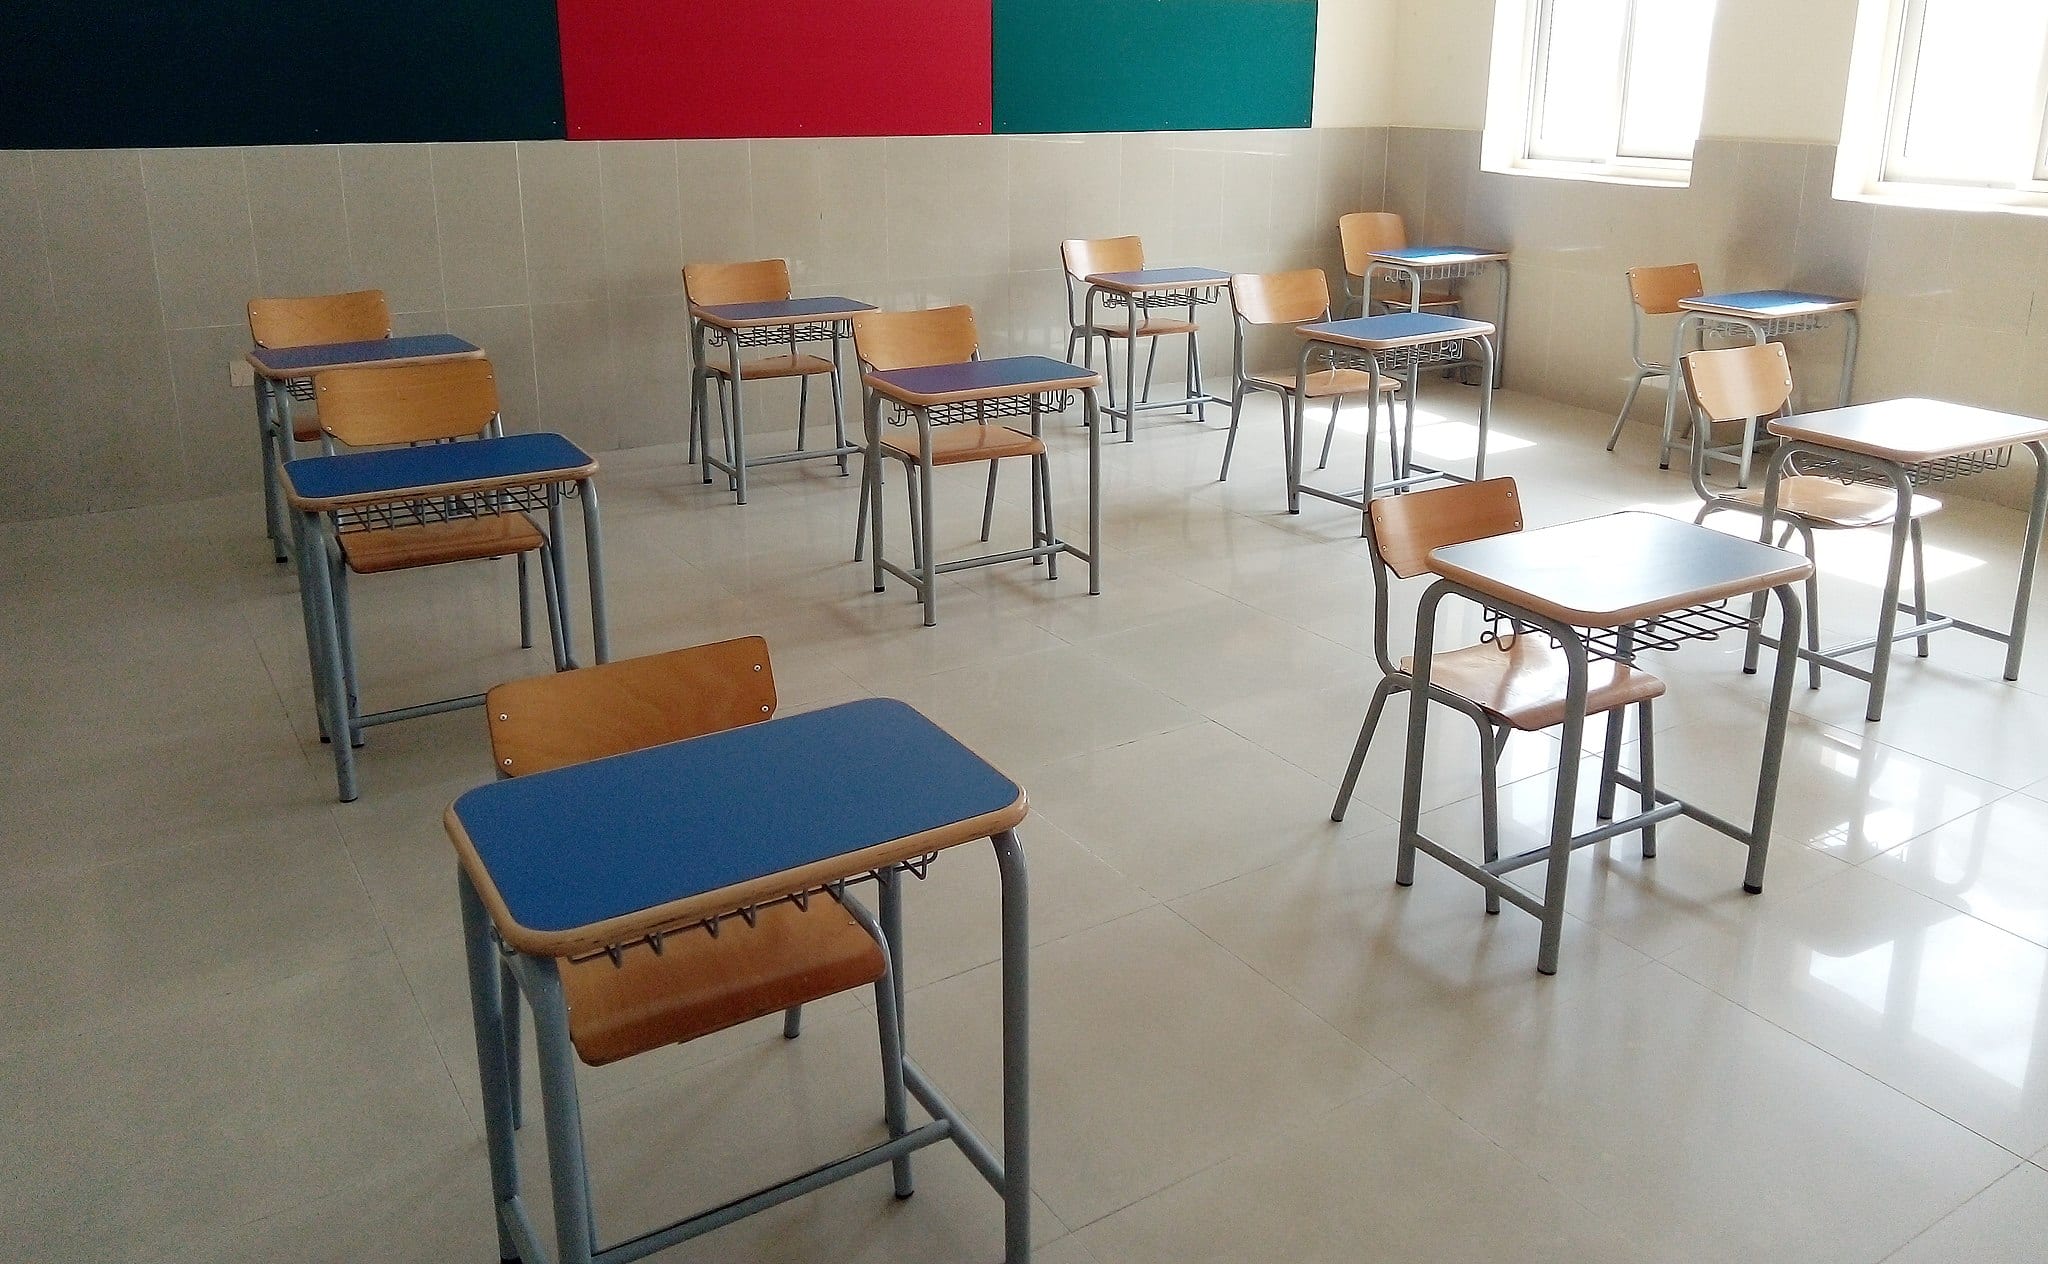 school classroom seating arrangement during the time of COVID-19